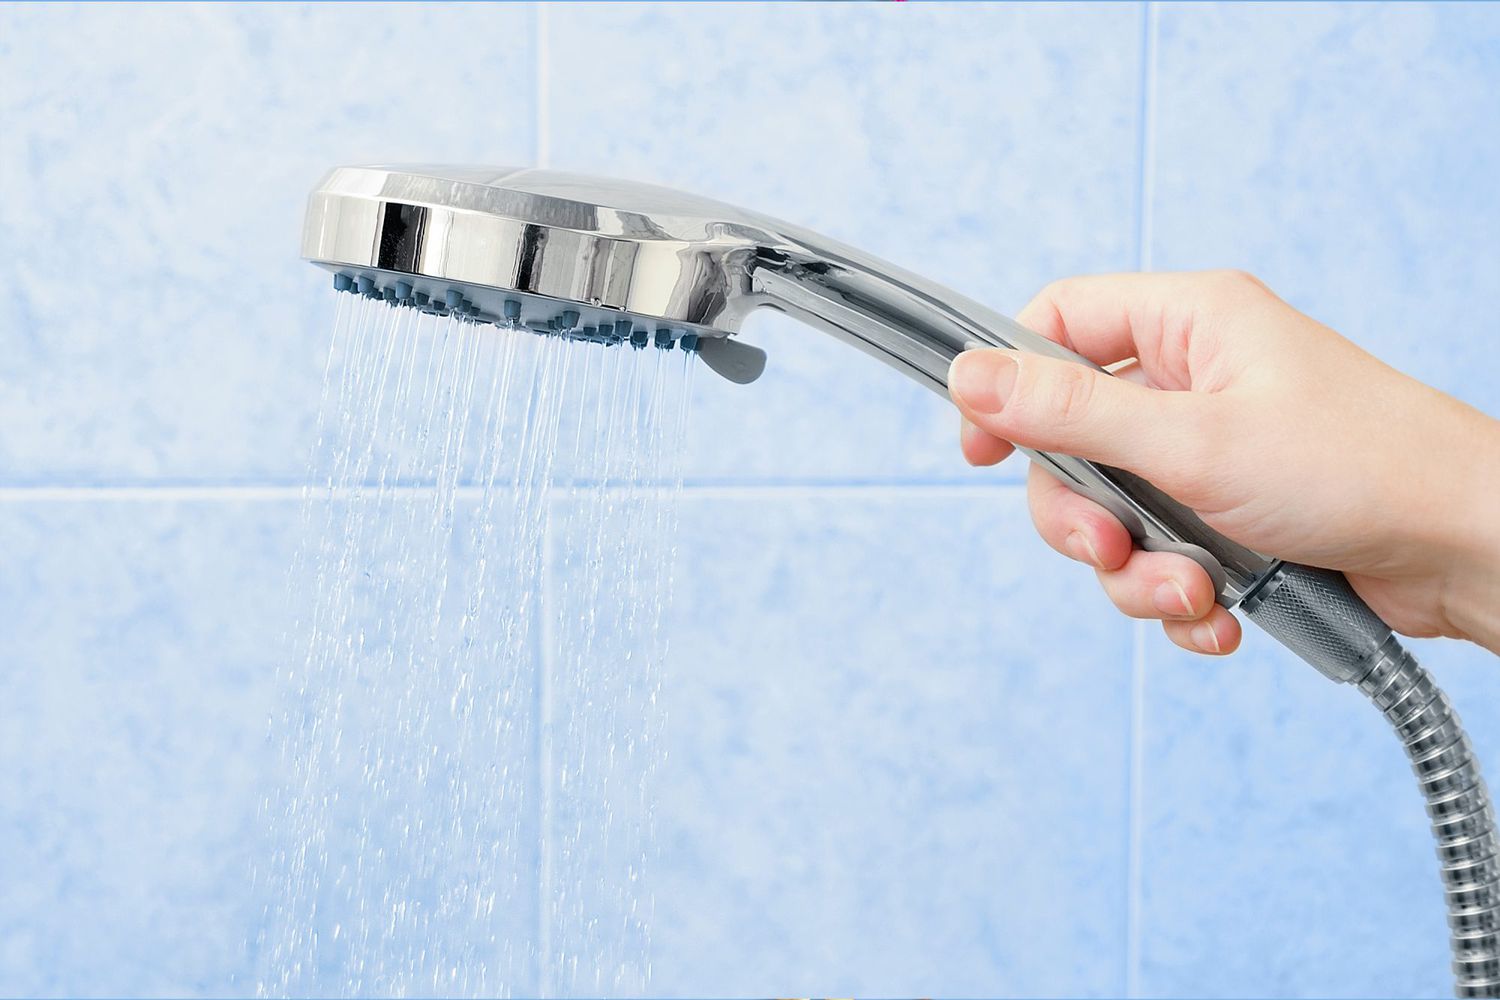 Health Benefits of Taking Cold Showers: close-up of hand holding shower head